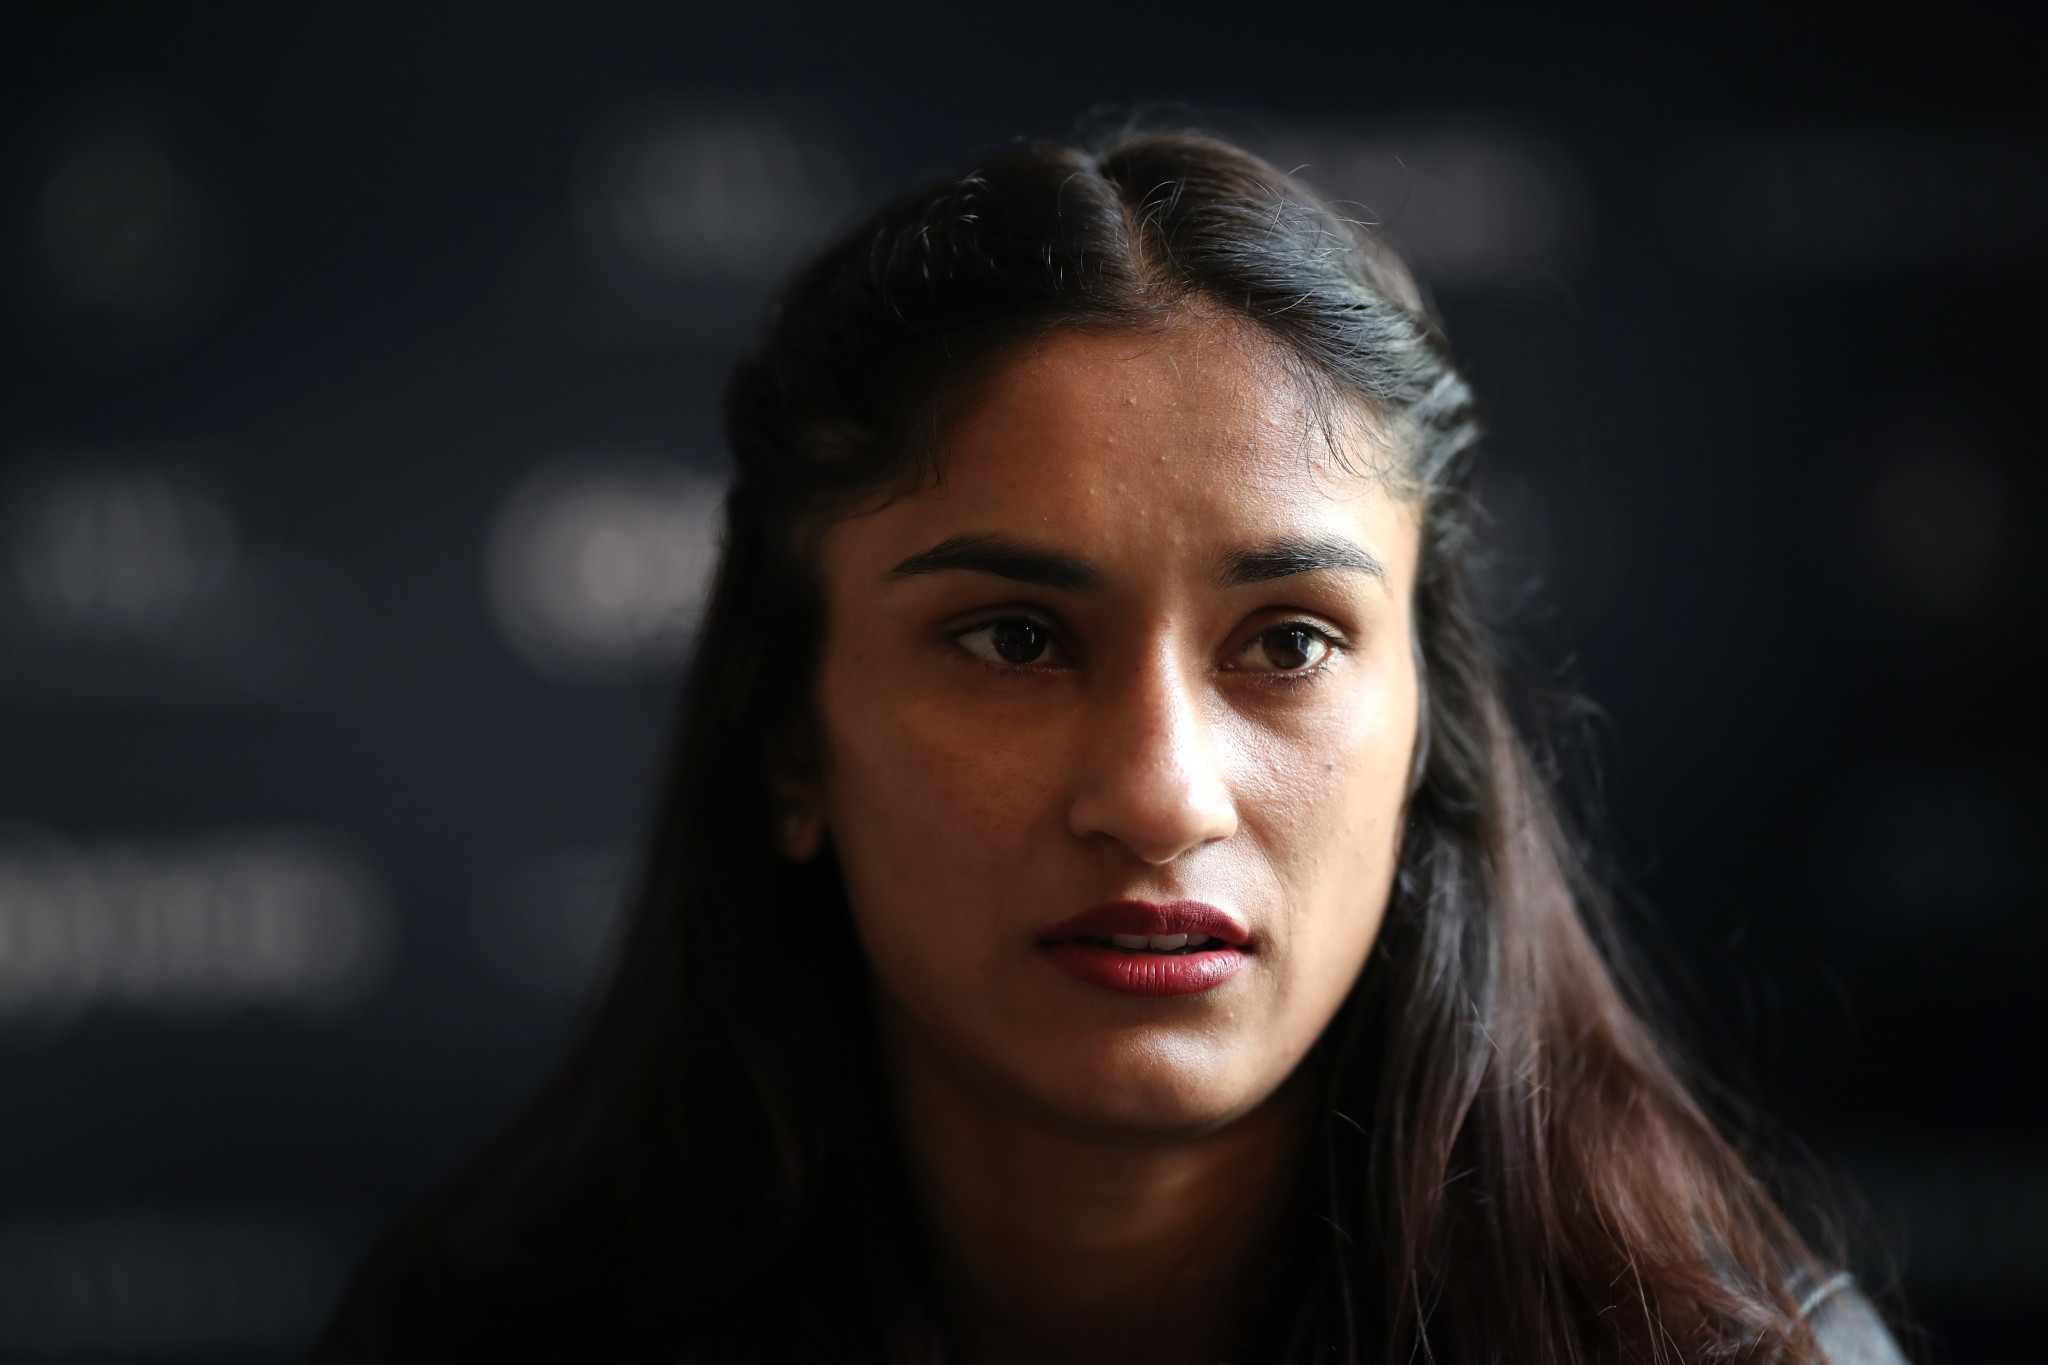 Vinesh Phogat is among the Indian wrestlers who have accused WFI President Brij Bhushan Sharan Singh of sexual harassment ©Getty Images